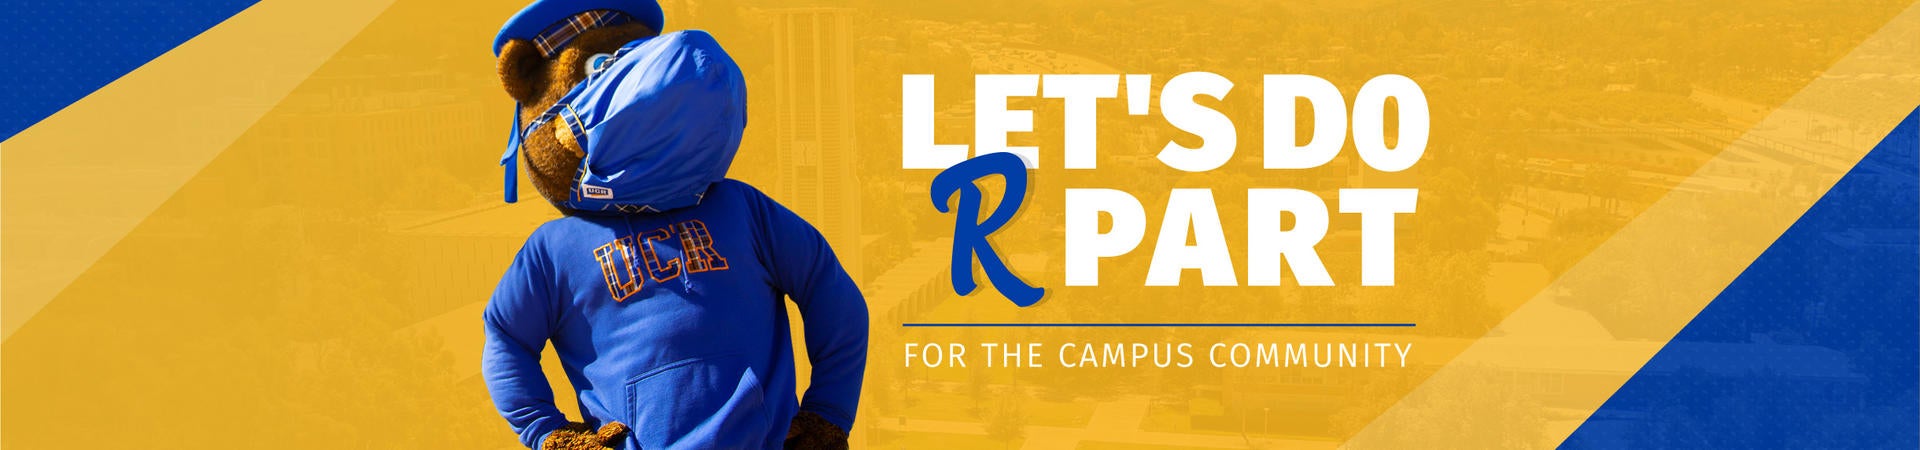 Let's do R'part: Return to Campus